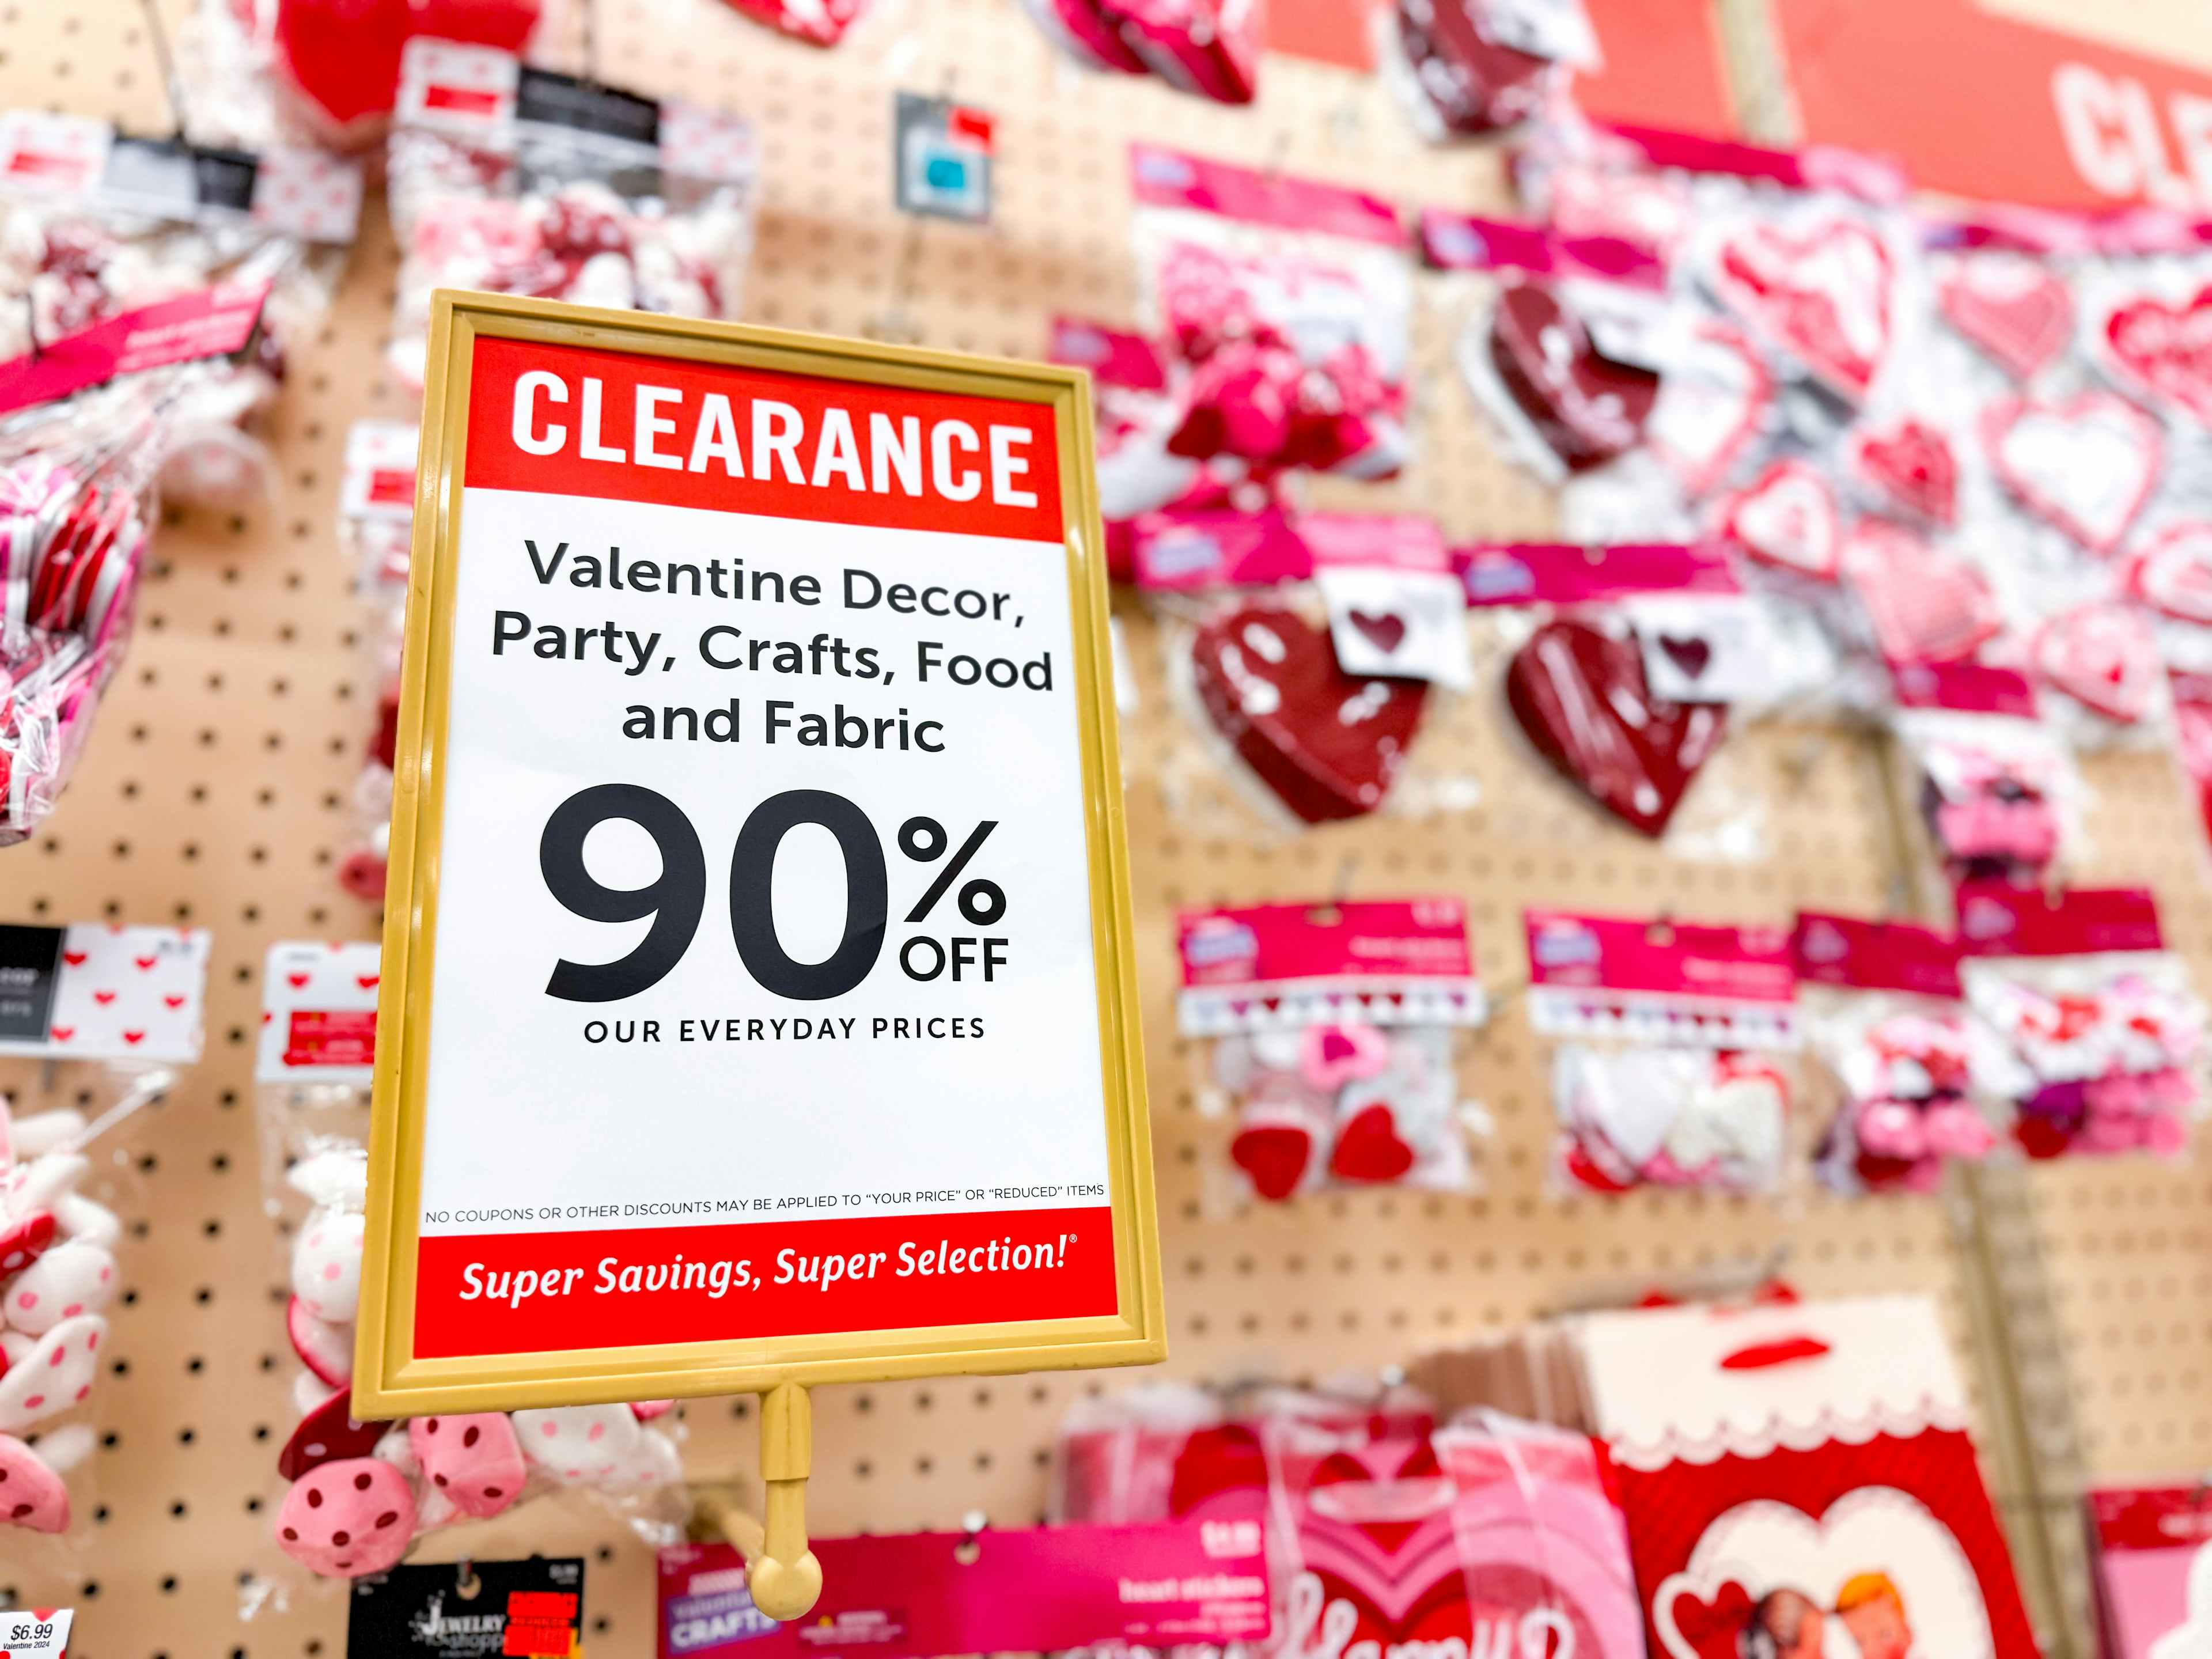 hobby-lobby-retail-valentines-day-clearance-90-off-march-1